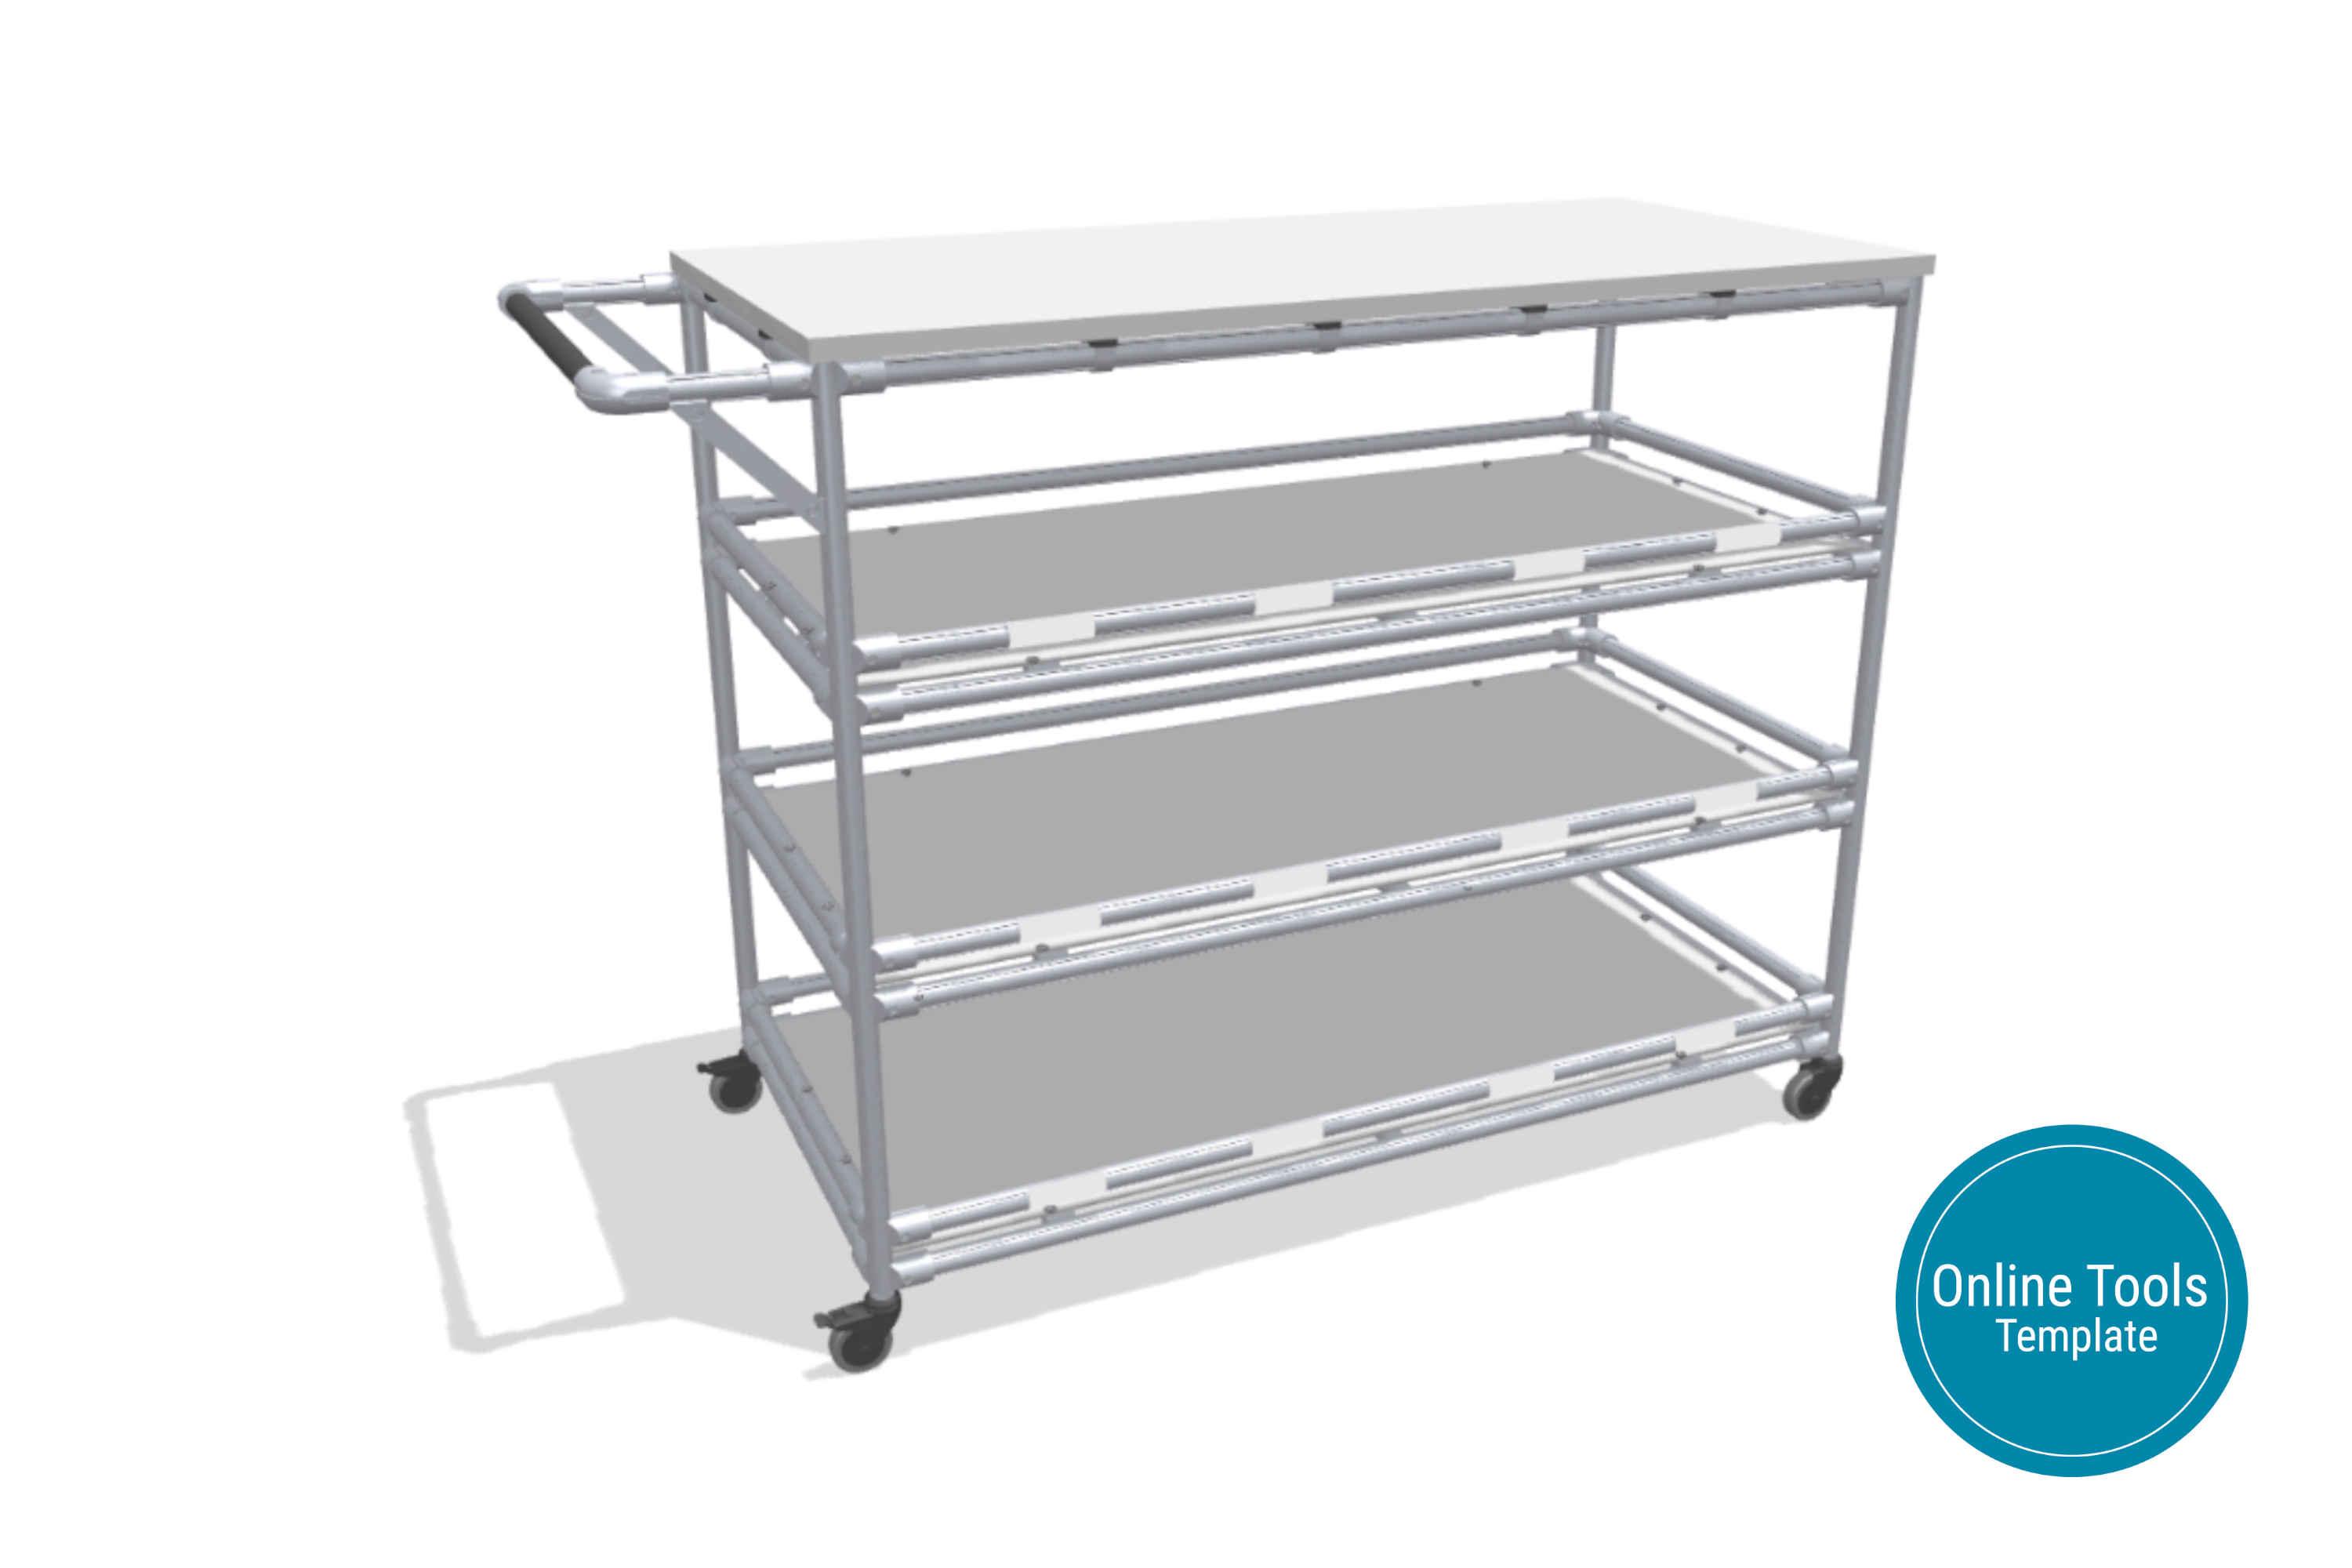 Practical hand trolley with working surface and storage levels